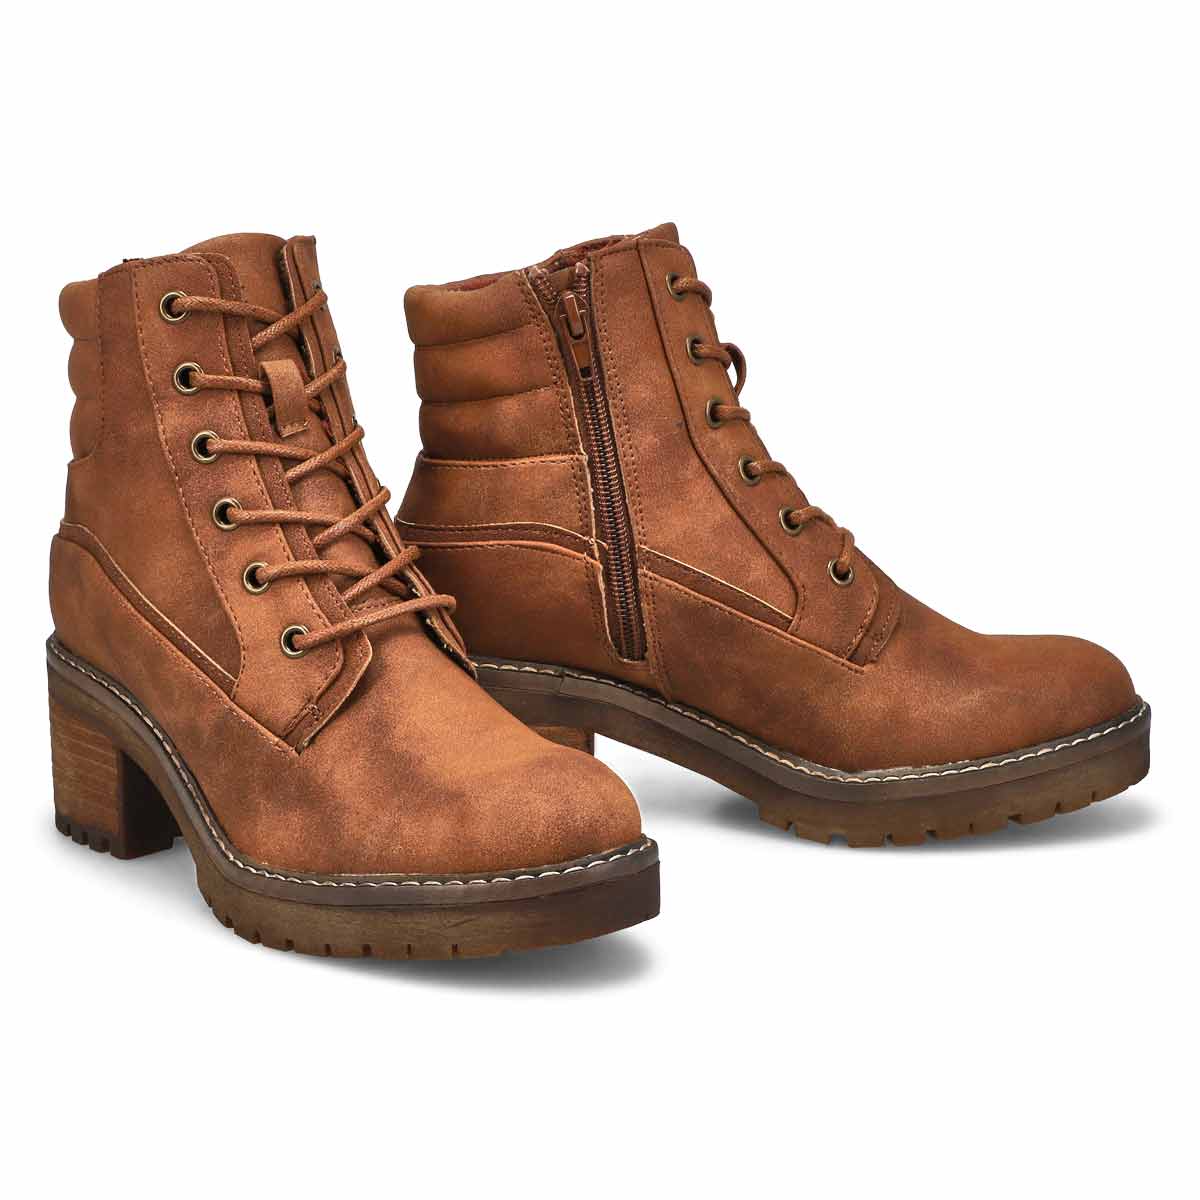 Women's Therese Ankle Boot - Cognac